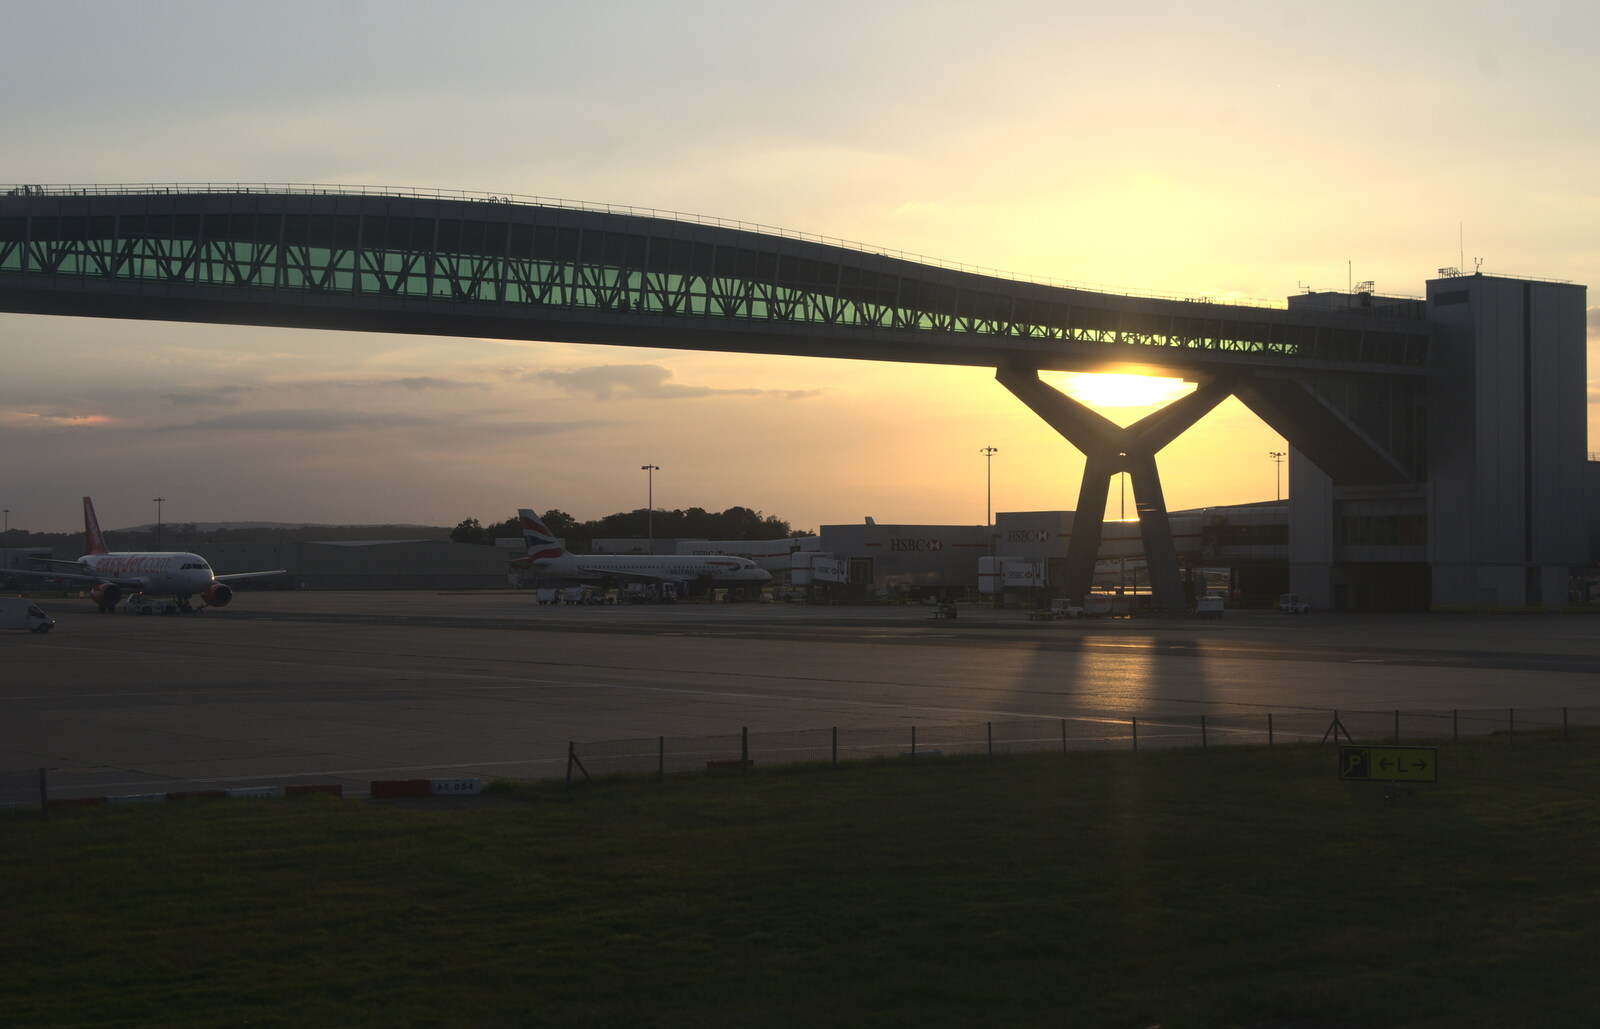 The giant inter-terminal walkway at Gatwick from The Open Education Challenge, Barcelona, Catalonia - 13th July 2014